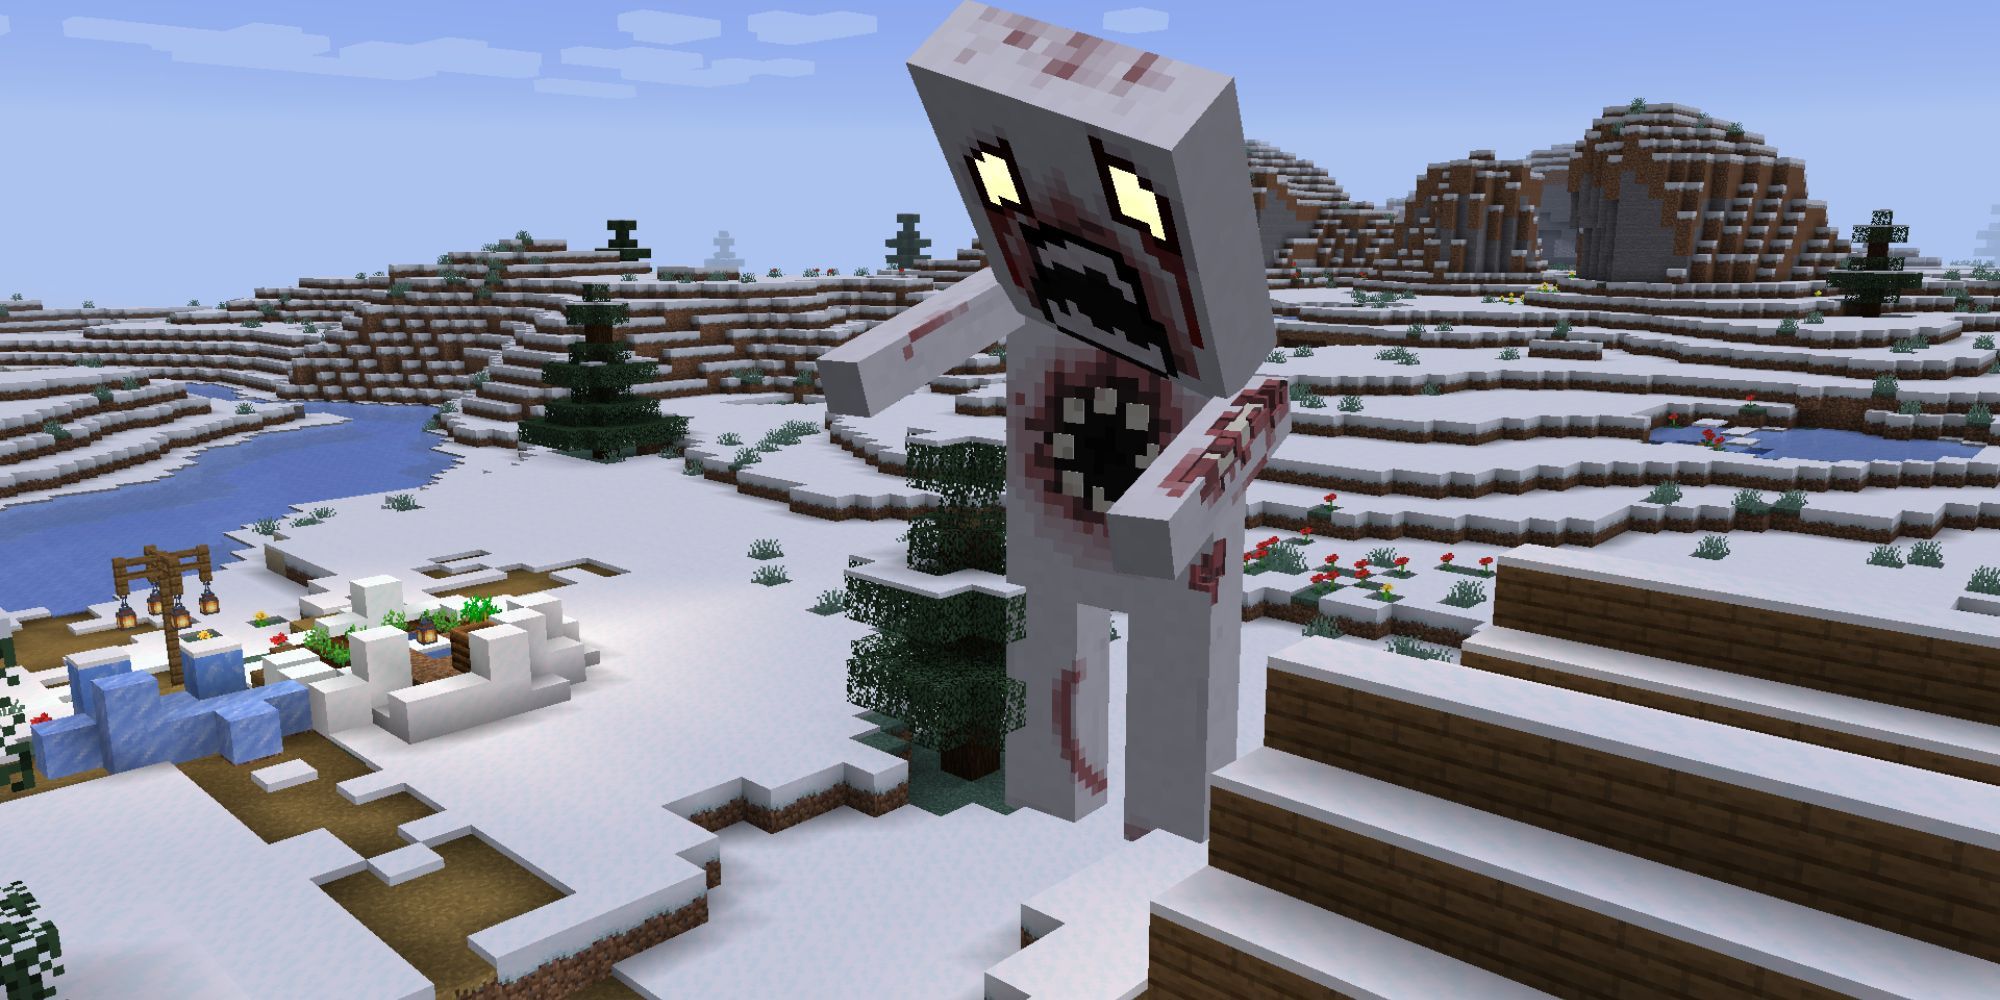 An incredibly tall, bloodied humanoid with white skin and two different mouths towers over a snowy village.